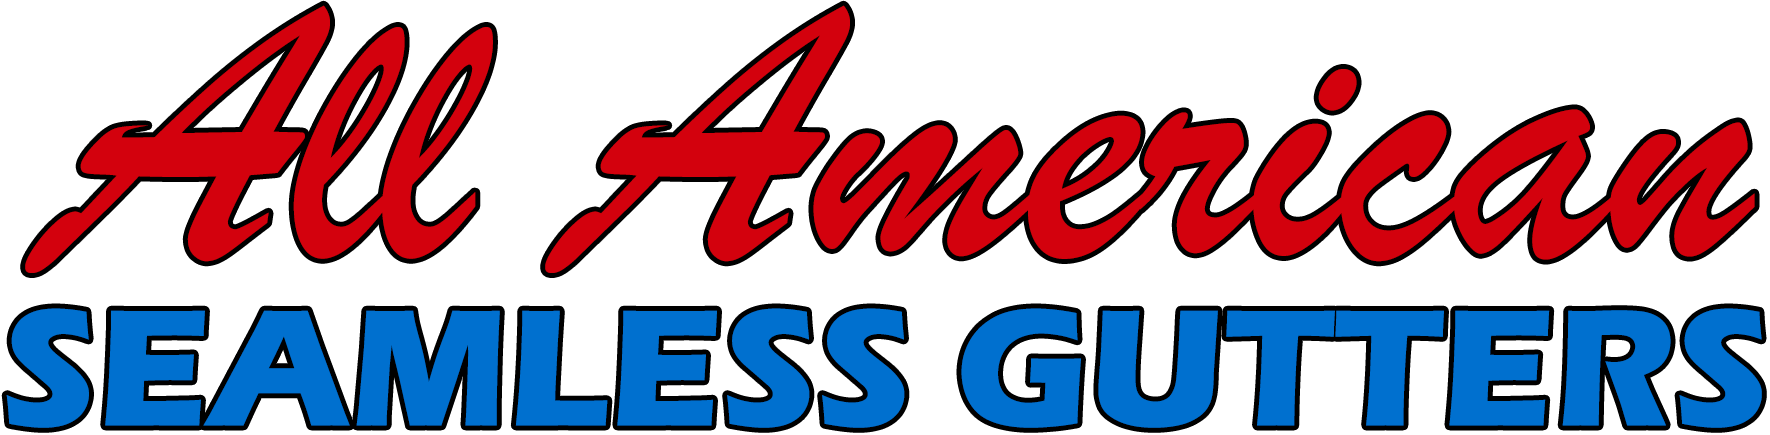 A red and blue logo for all american seamless gutters